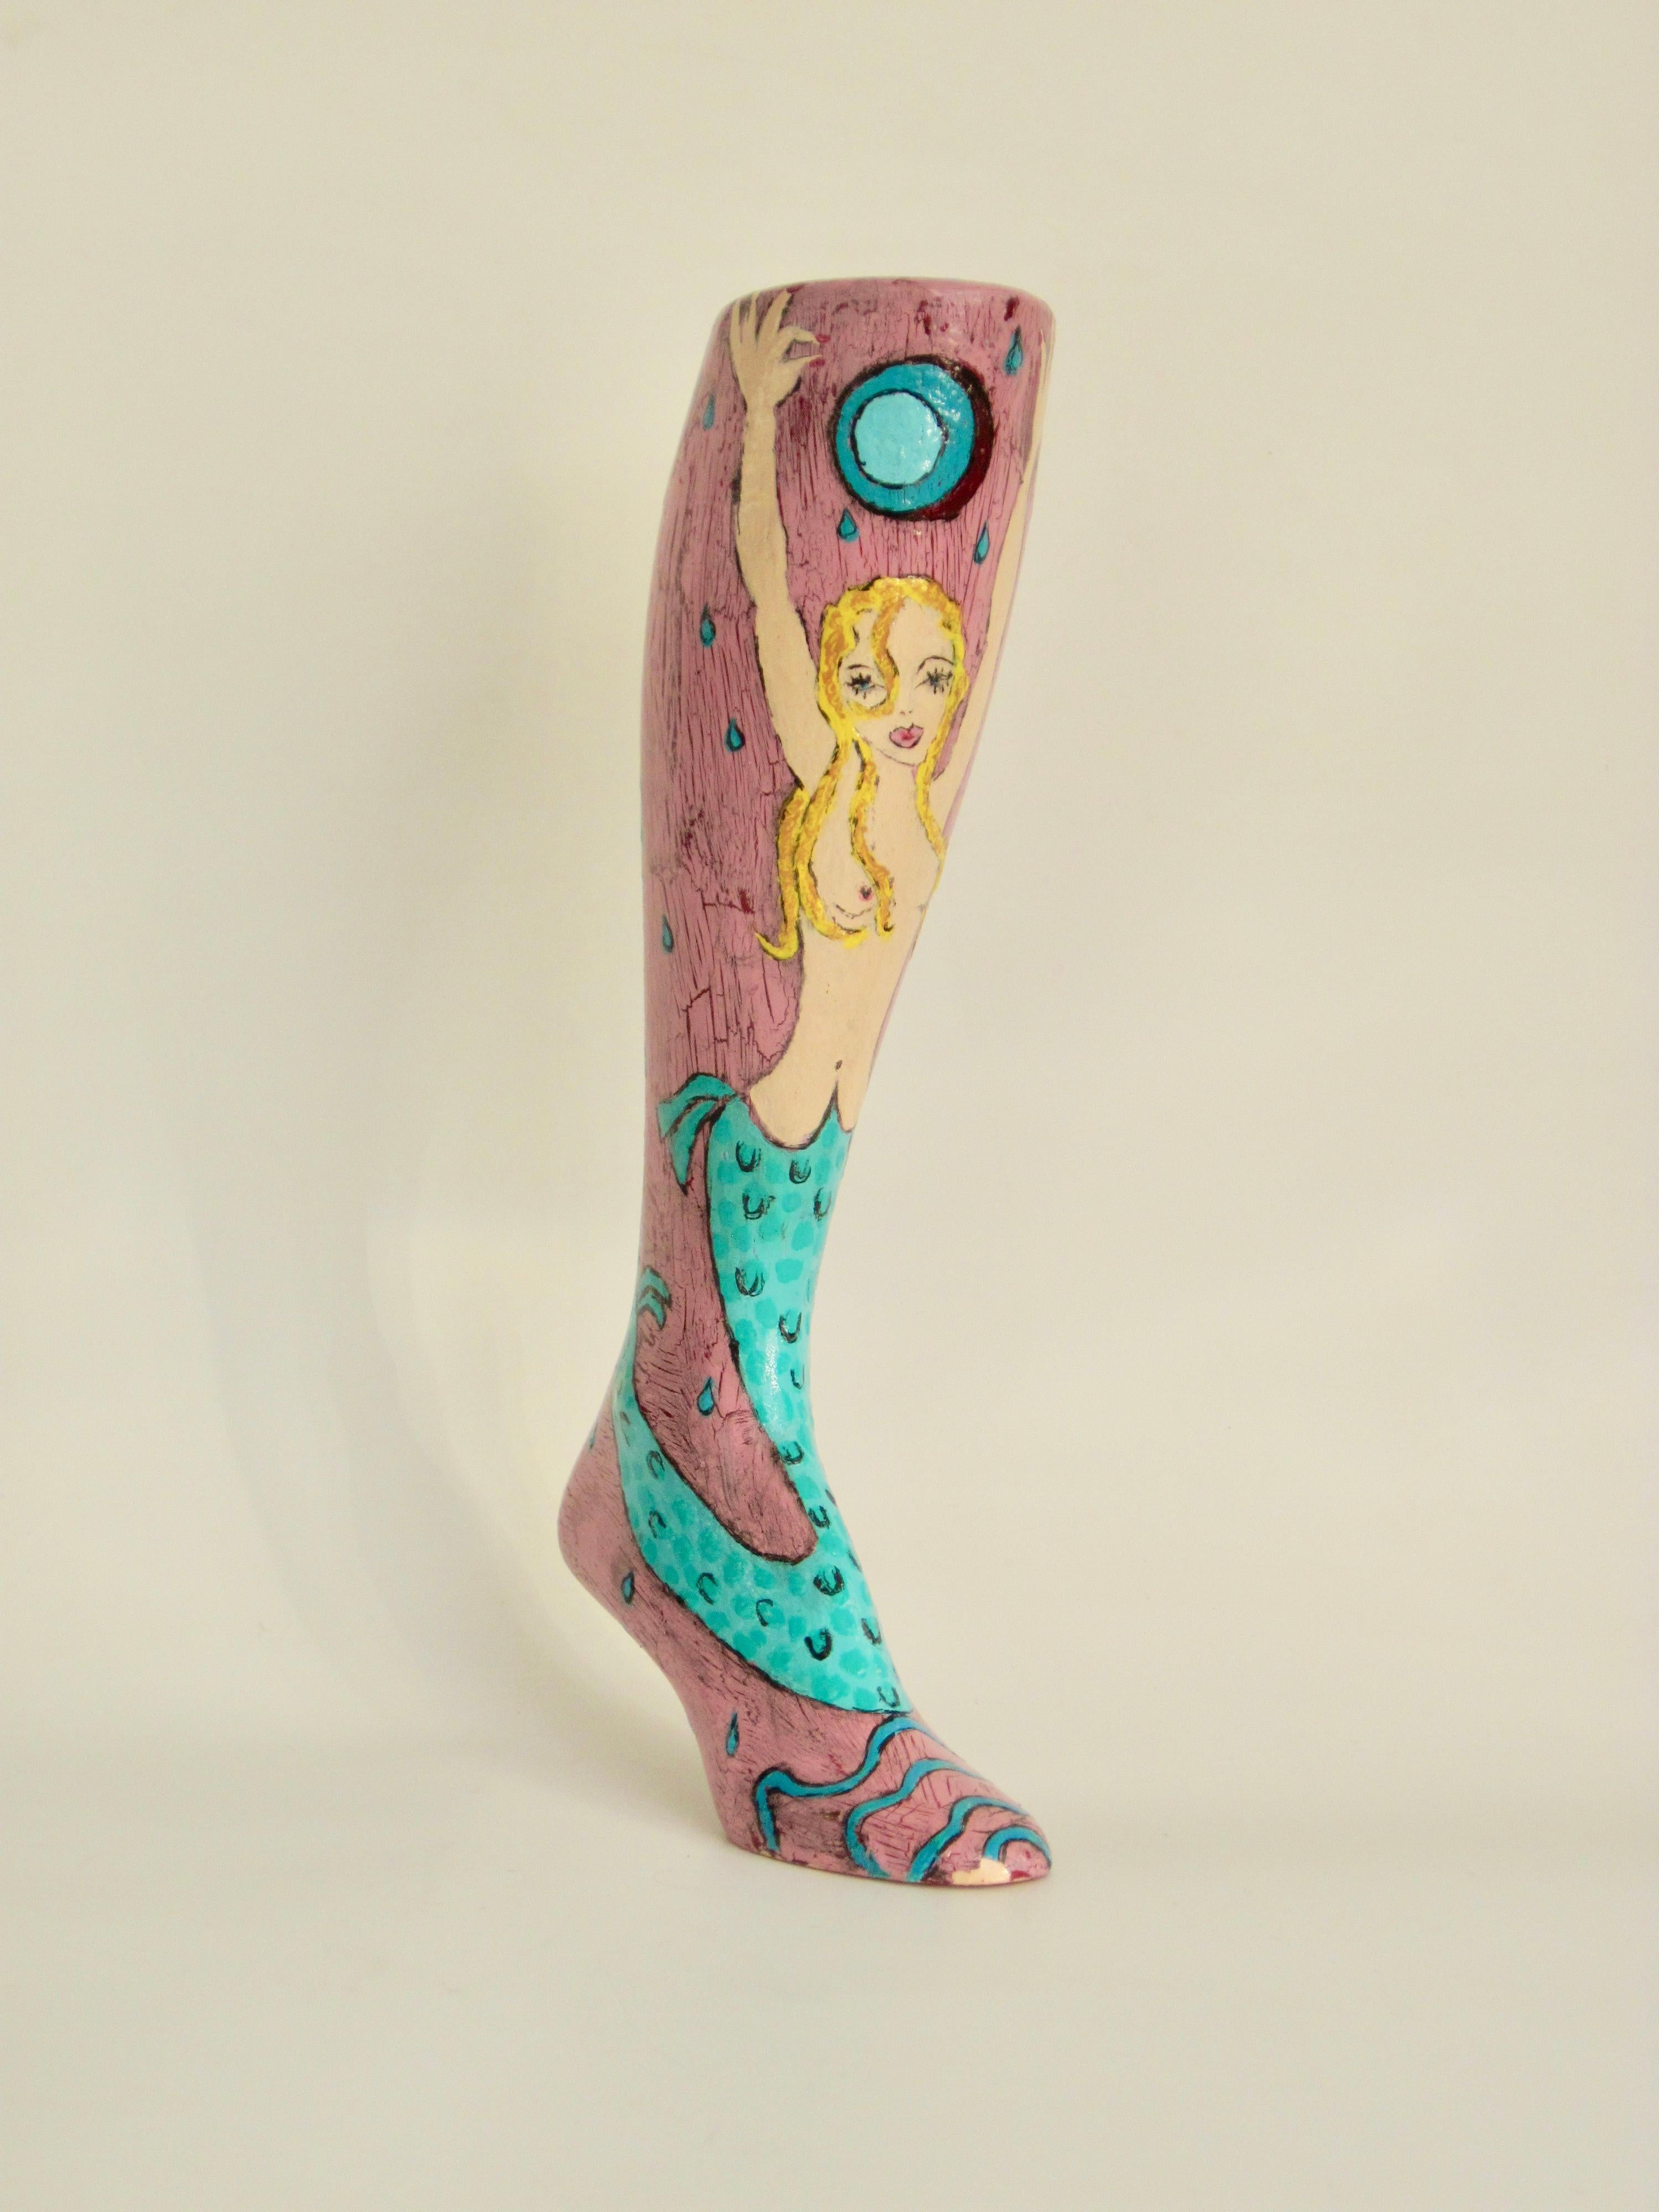 Folk art pink, yellow, and turquoise painted partial nude mermaid with moon and  sea life on a woman's mannequin leg. Fun boudoir or display piece. Signed.